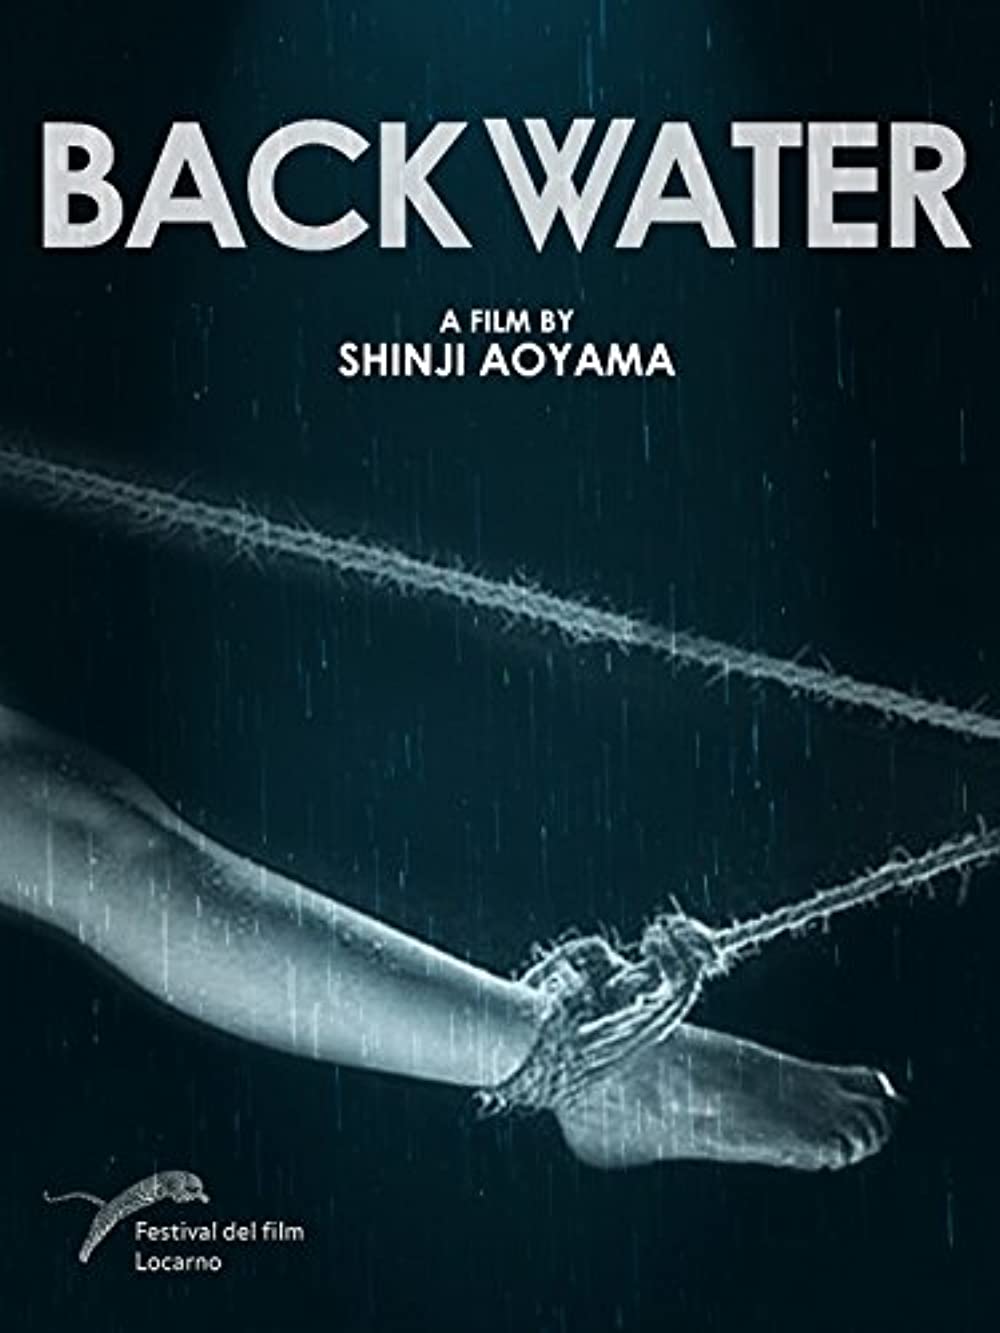 Backwater 2013 Japanese Movie 1080p BluRay 1.9GB Download